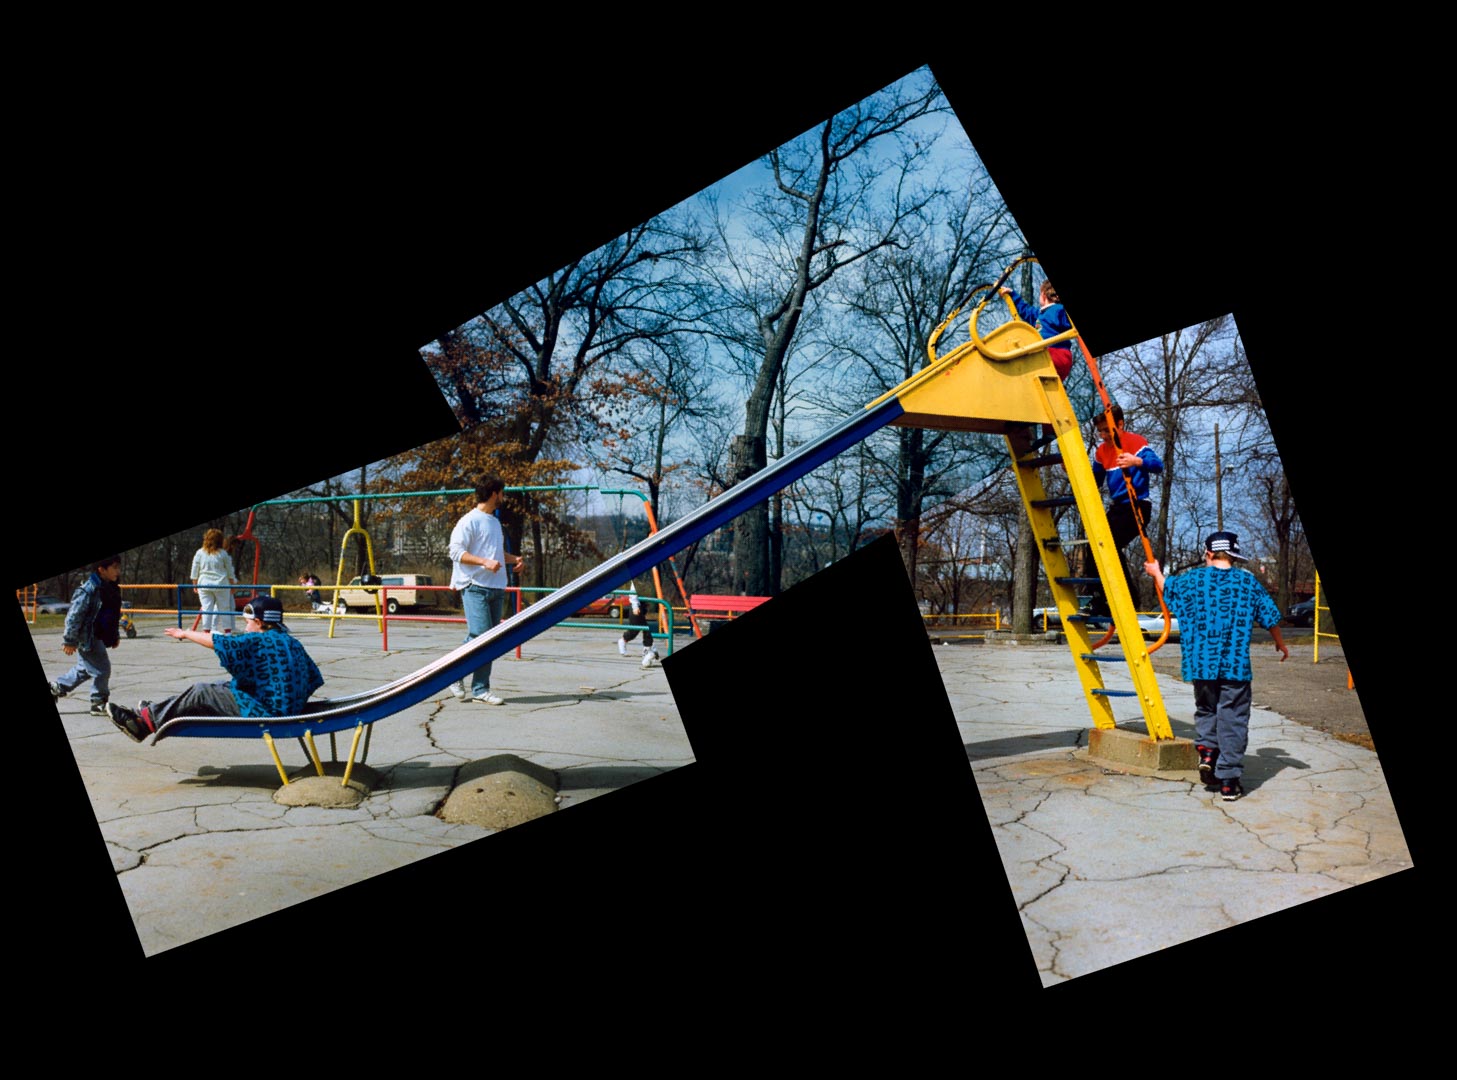 "Boy on the Slide", 1990, © Lewis Rogers, Contemporary Art Photography,  Contemporary Photography, Color Film Photography, 20th Century Photography, Photo-Sequence, Diptych Photography, Polyptych Photography,Triptych Photography, Postmodern Photography, 1990’s Photography, Constructivism Photography